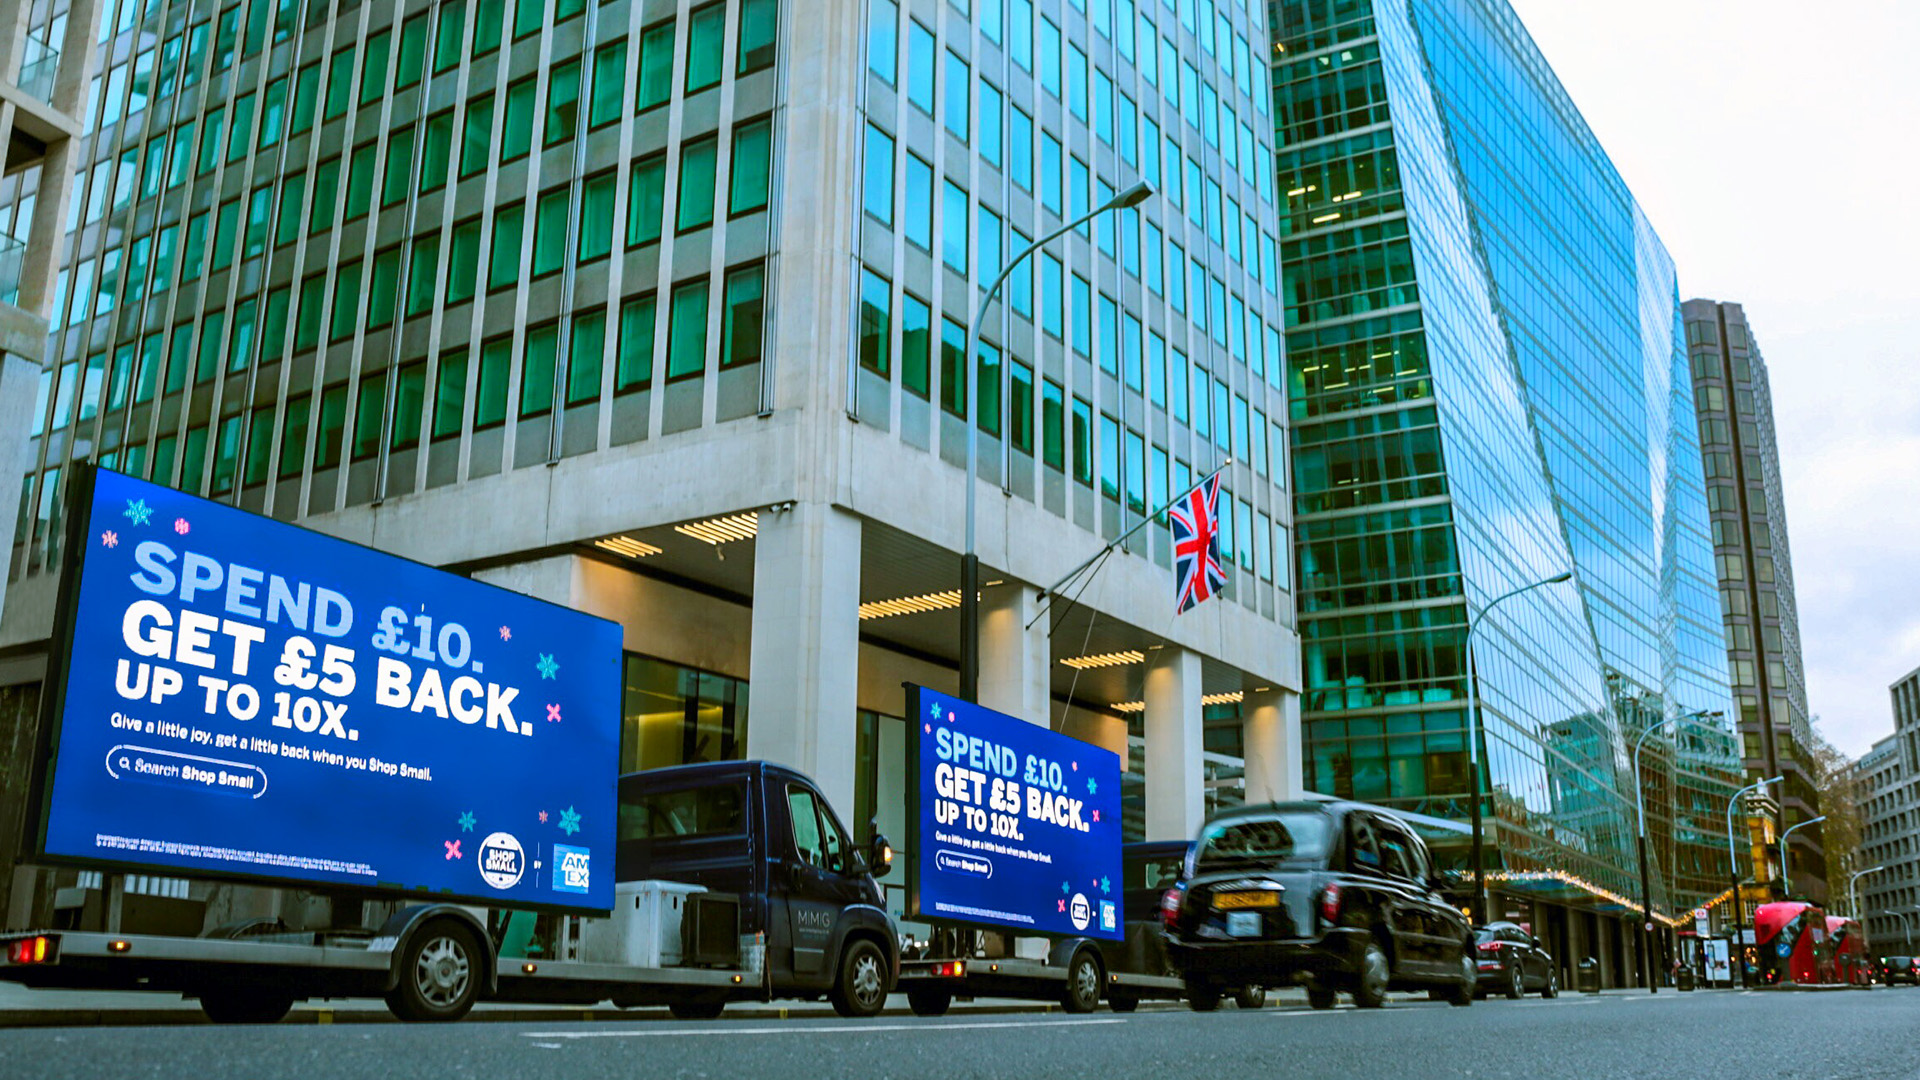 American Express Digivan convoy of 2 in a business district